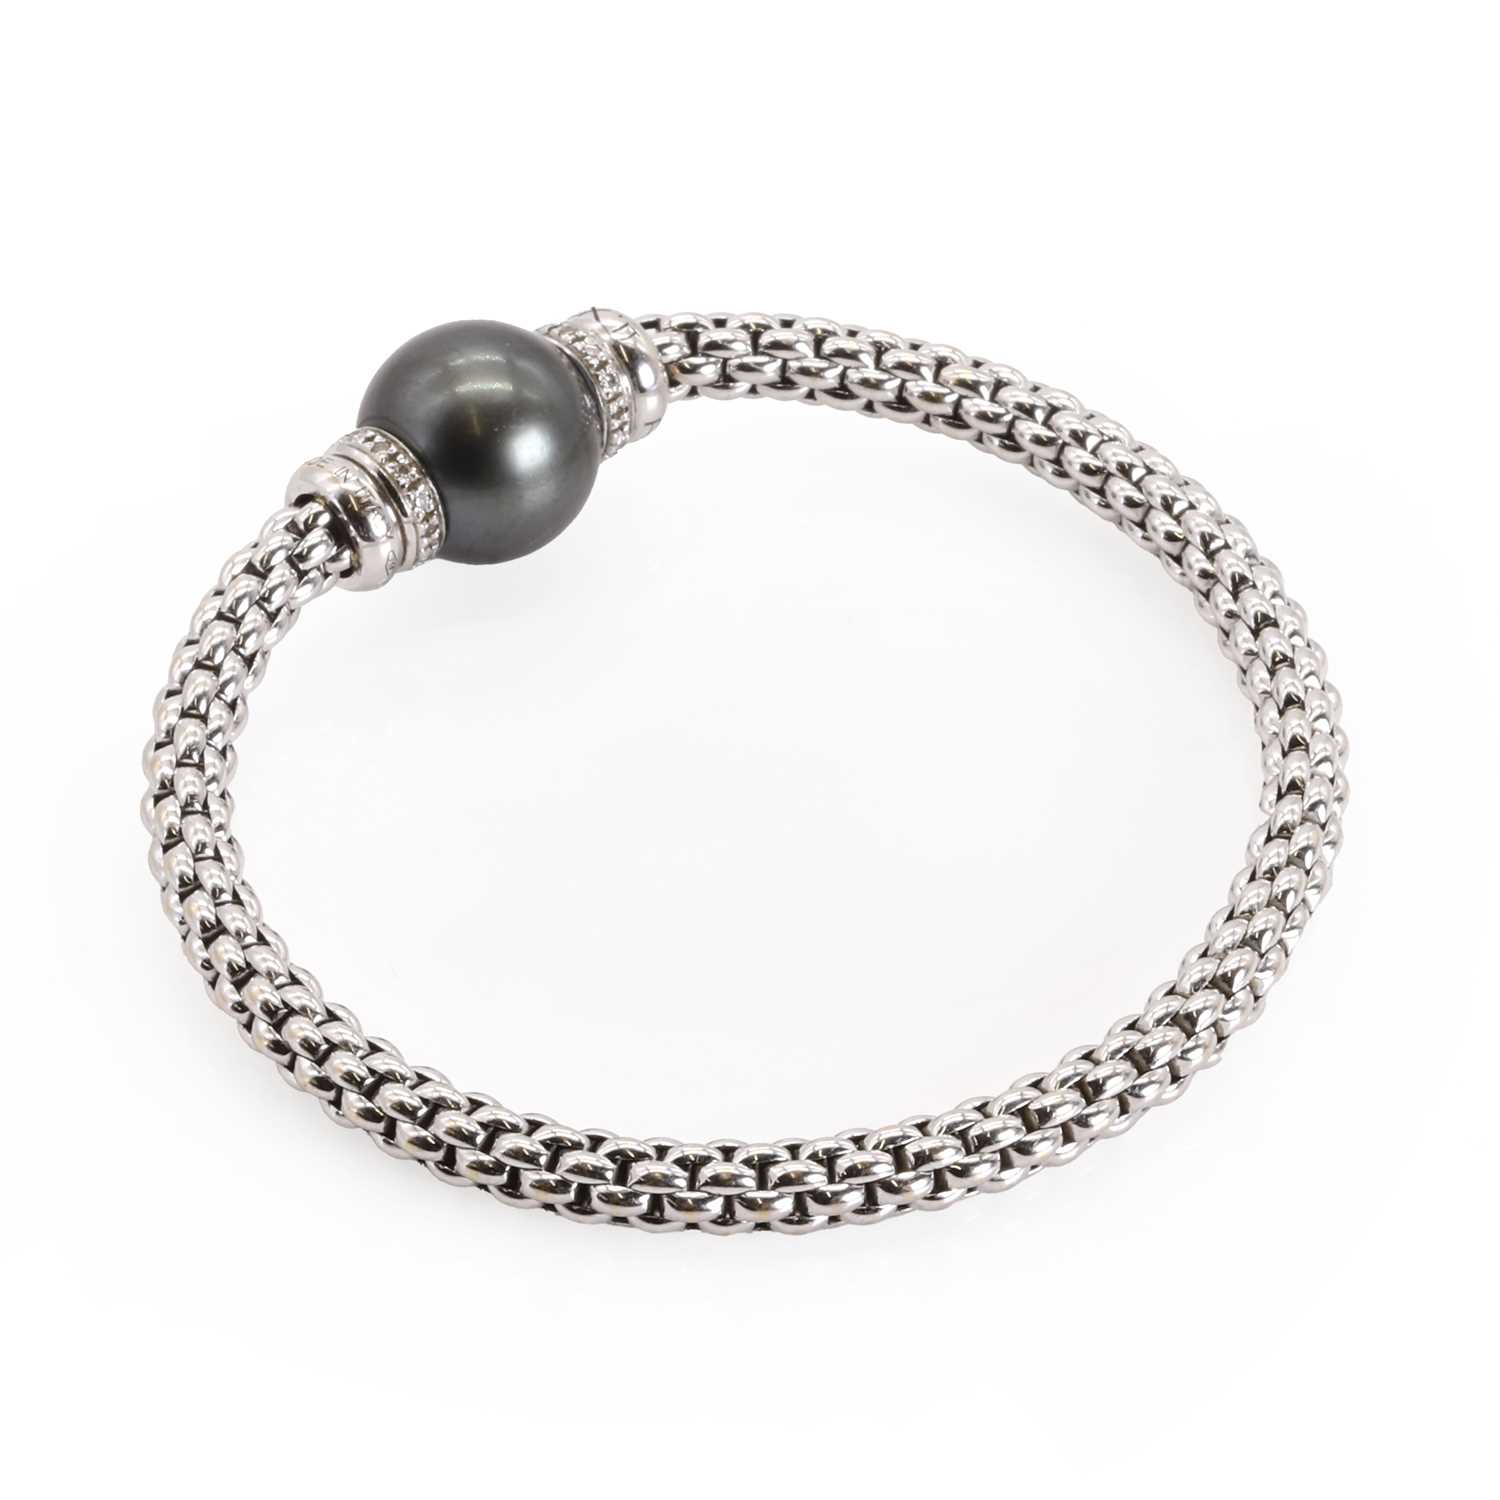 An 18ct white gold Tahitian pearl and diamond 'Flex'it' bracelet, by Fope, - Image 2 of 2